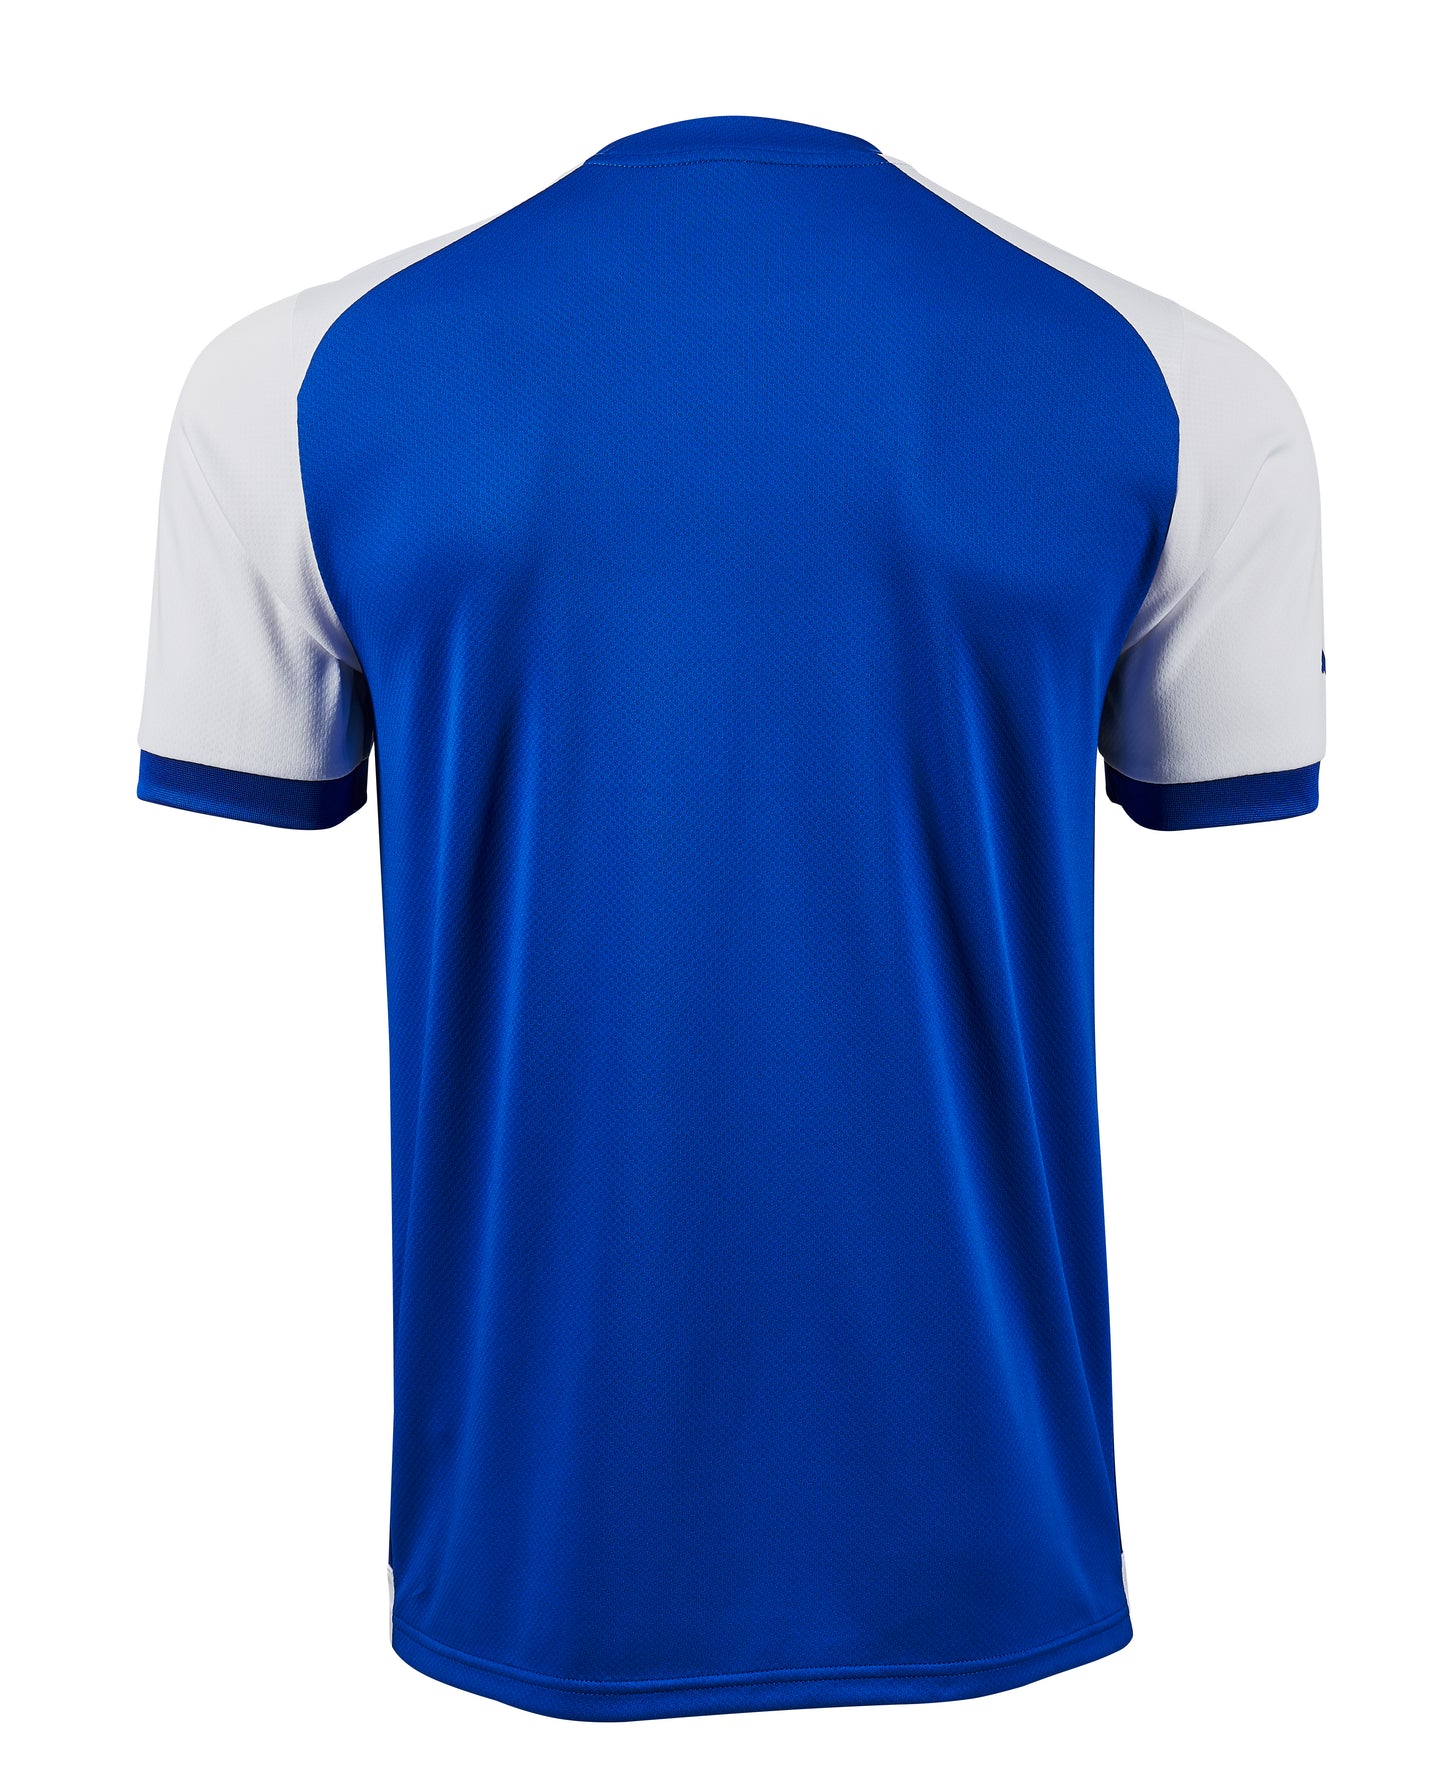 Home Youth Shirt 22/23 (Blue/White)